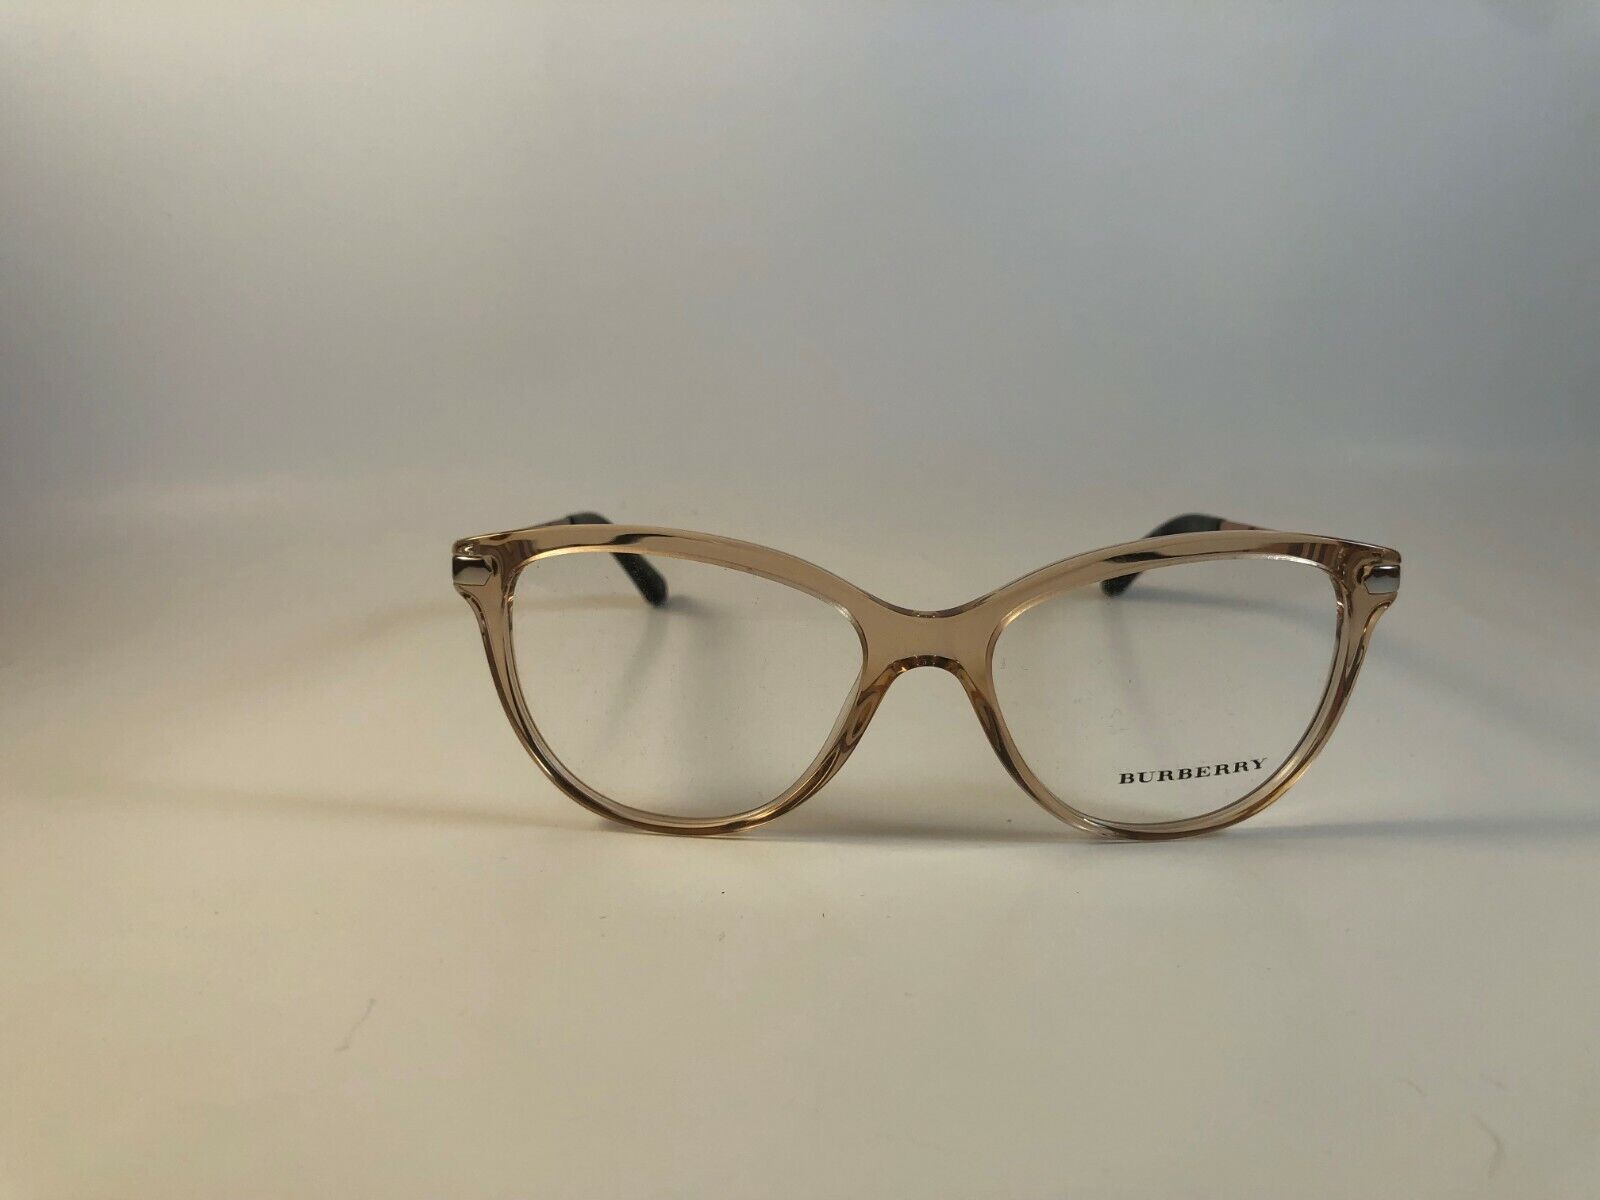 BURBERRY B 2280 3358 52-16-140 ITALY CLEAR GOLD | eBay